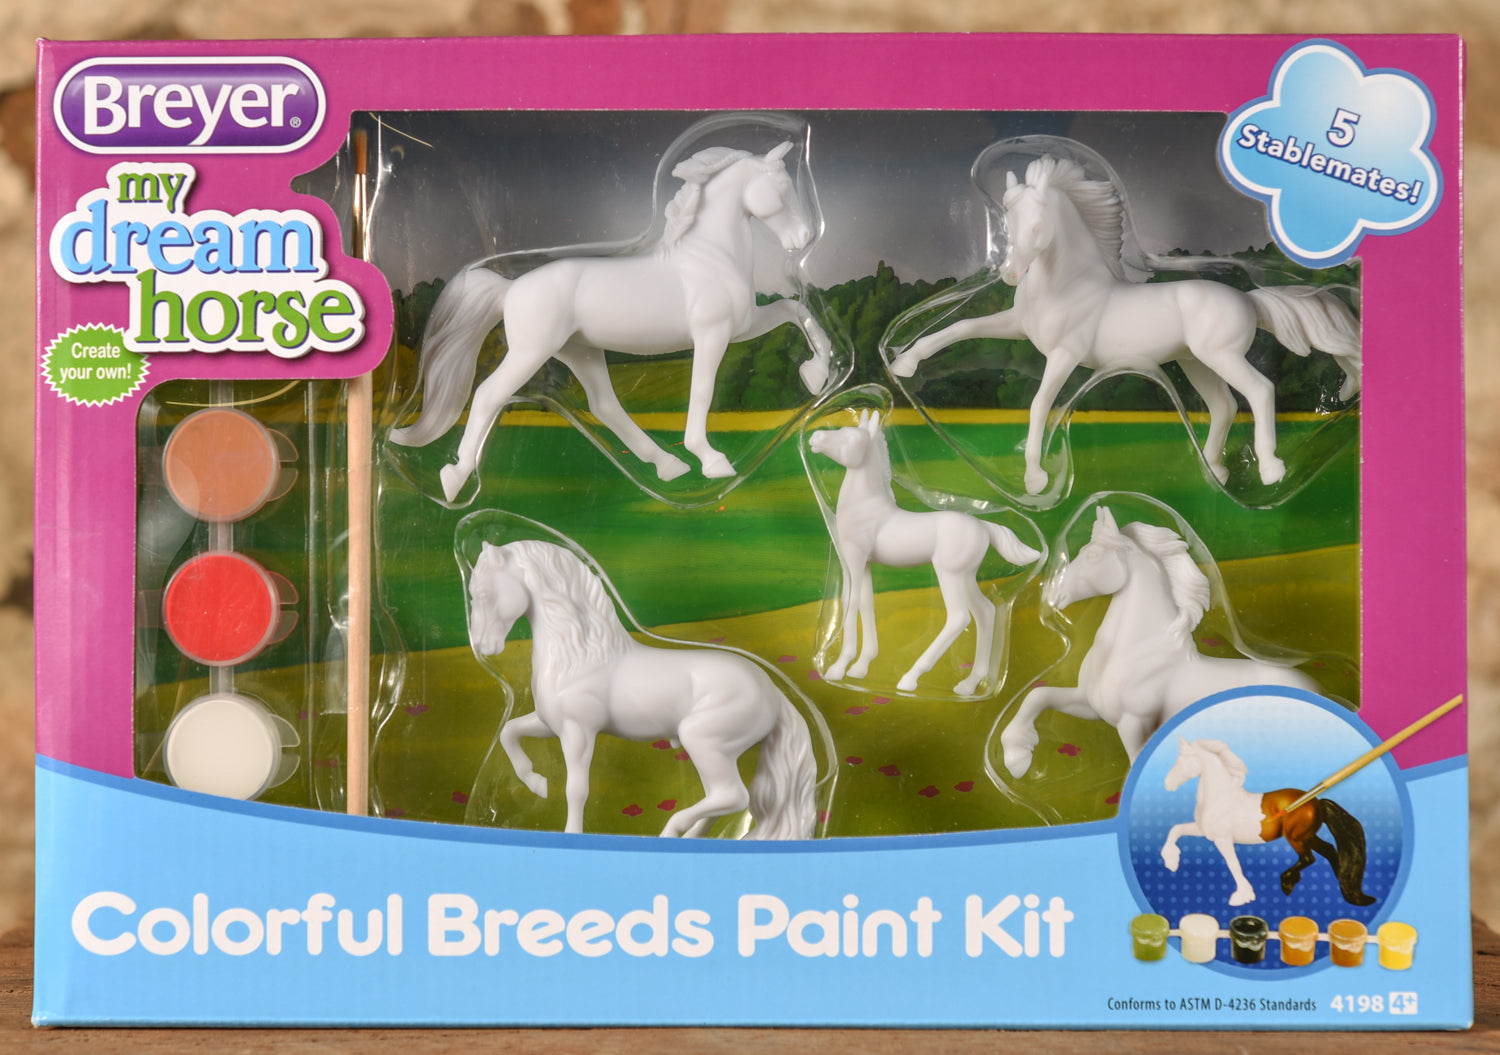 Stablemates - Paint Your Own Horse - Colorful Breeds Kit (retired